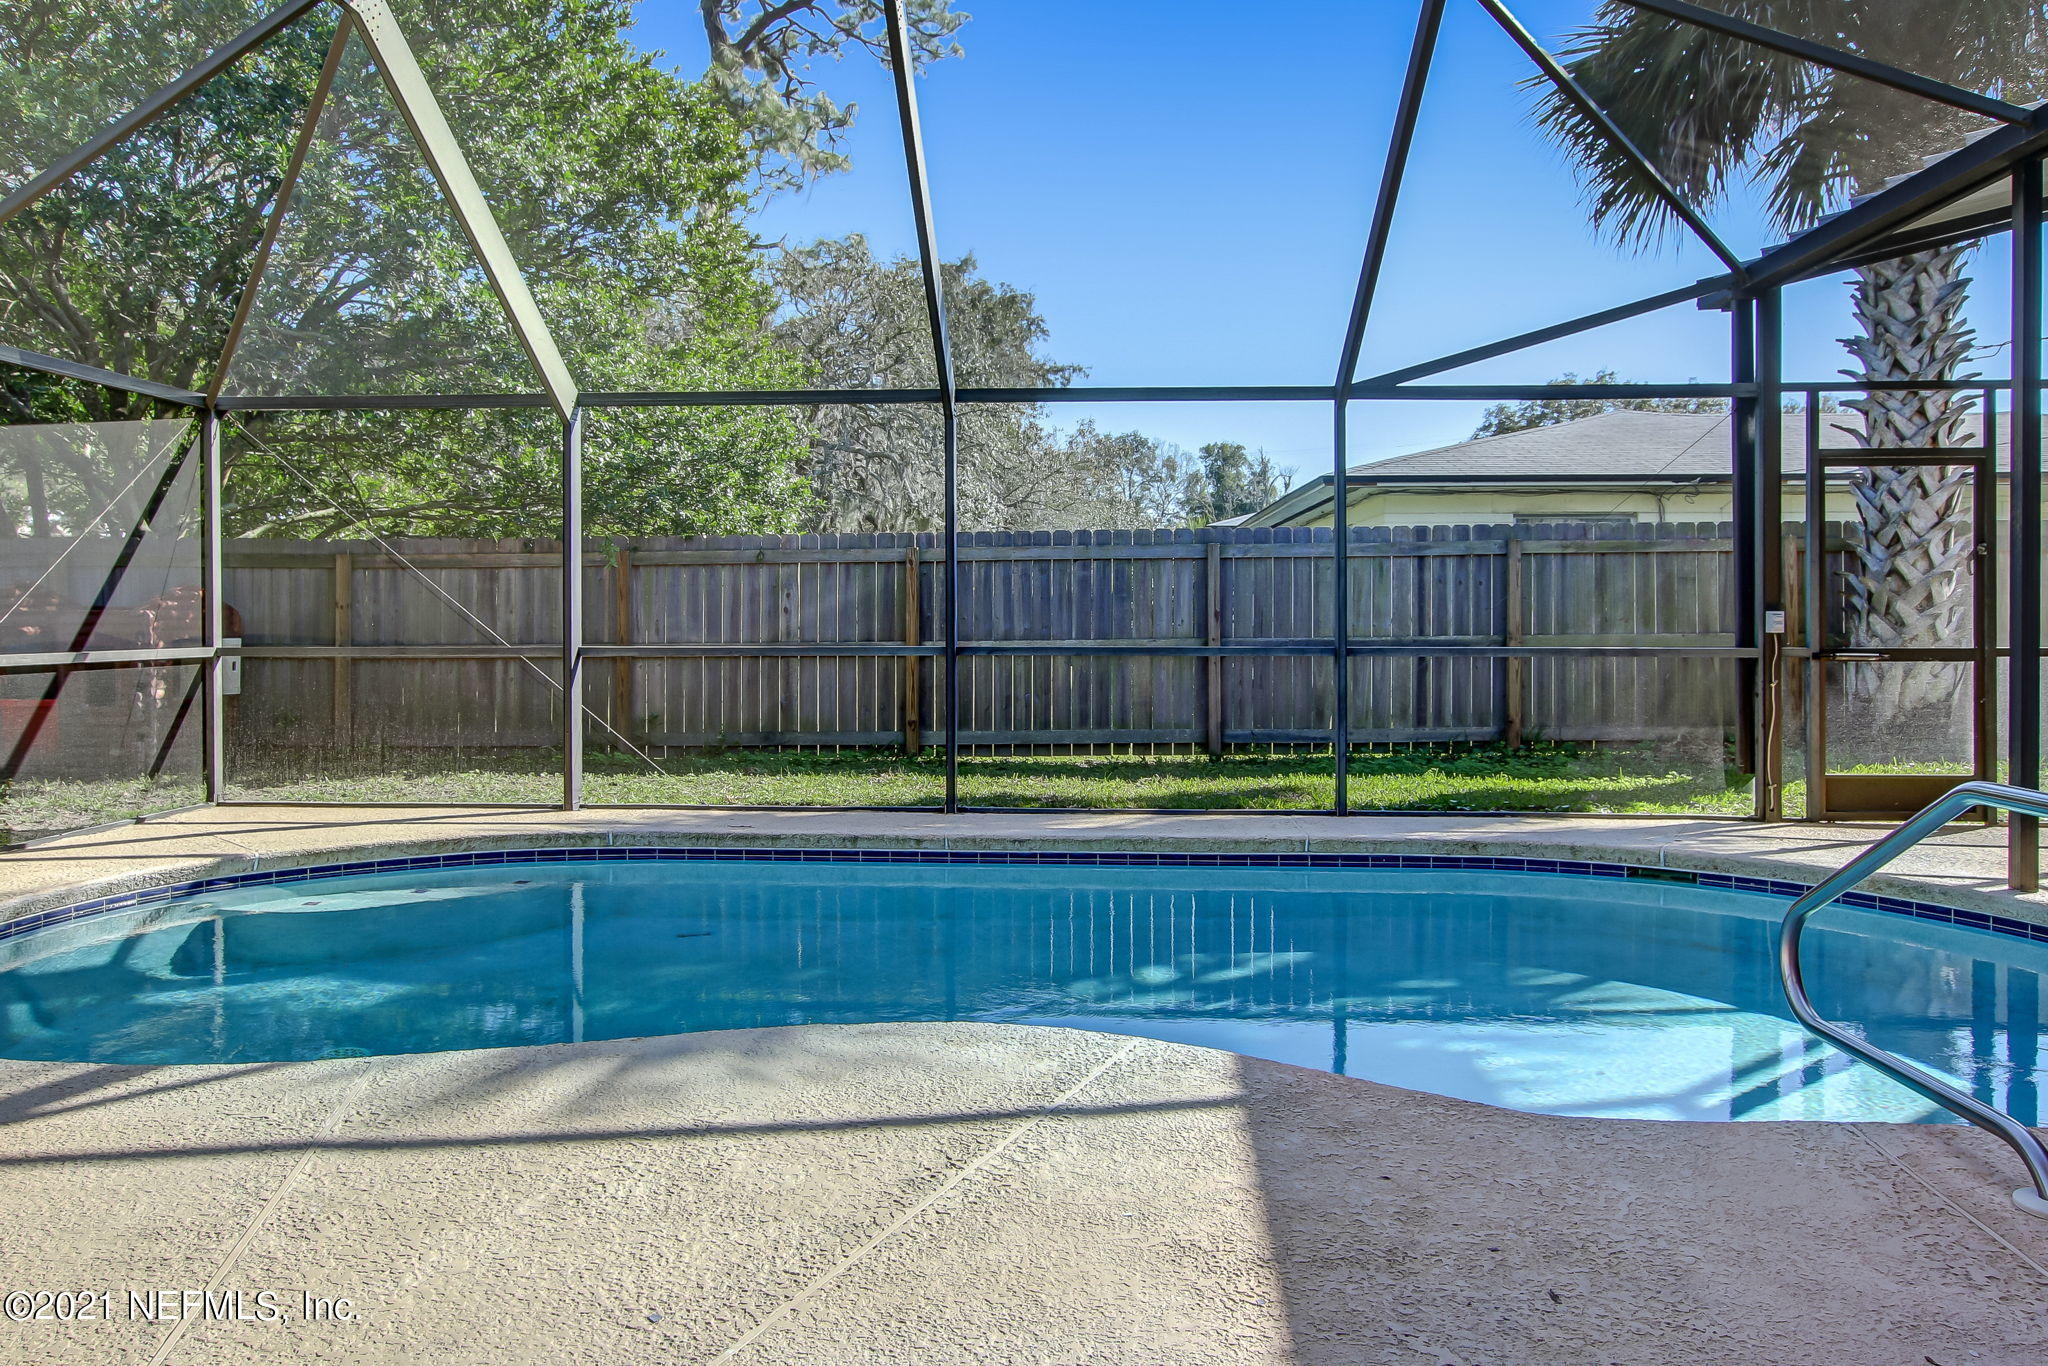 a view of a backyard with a small swimming pool